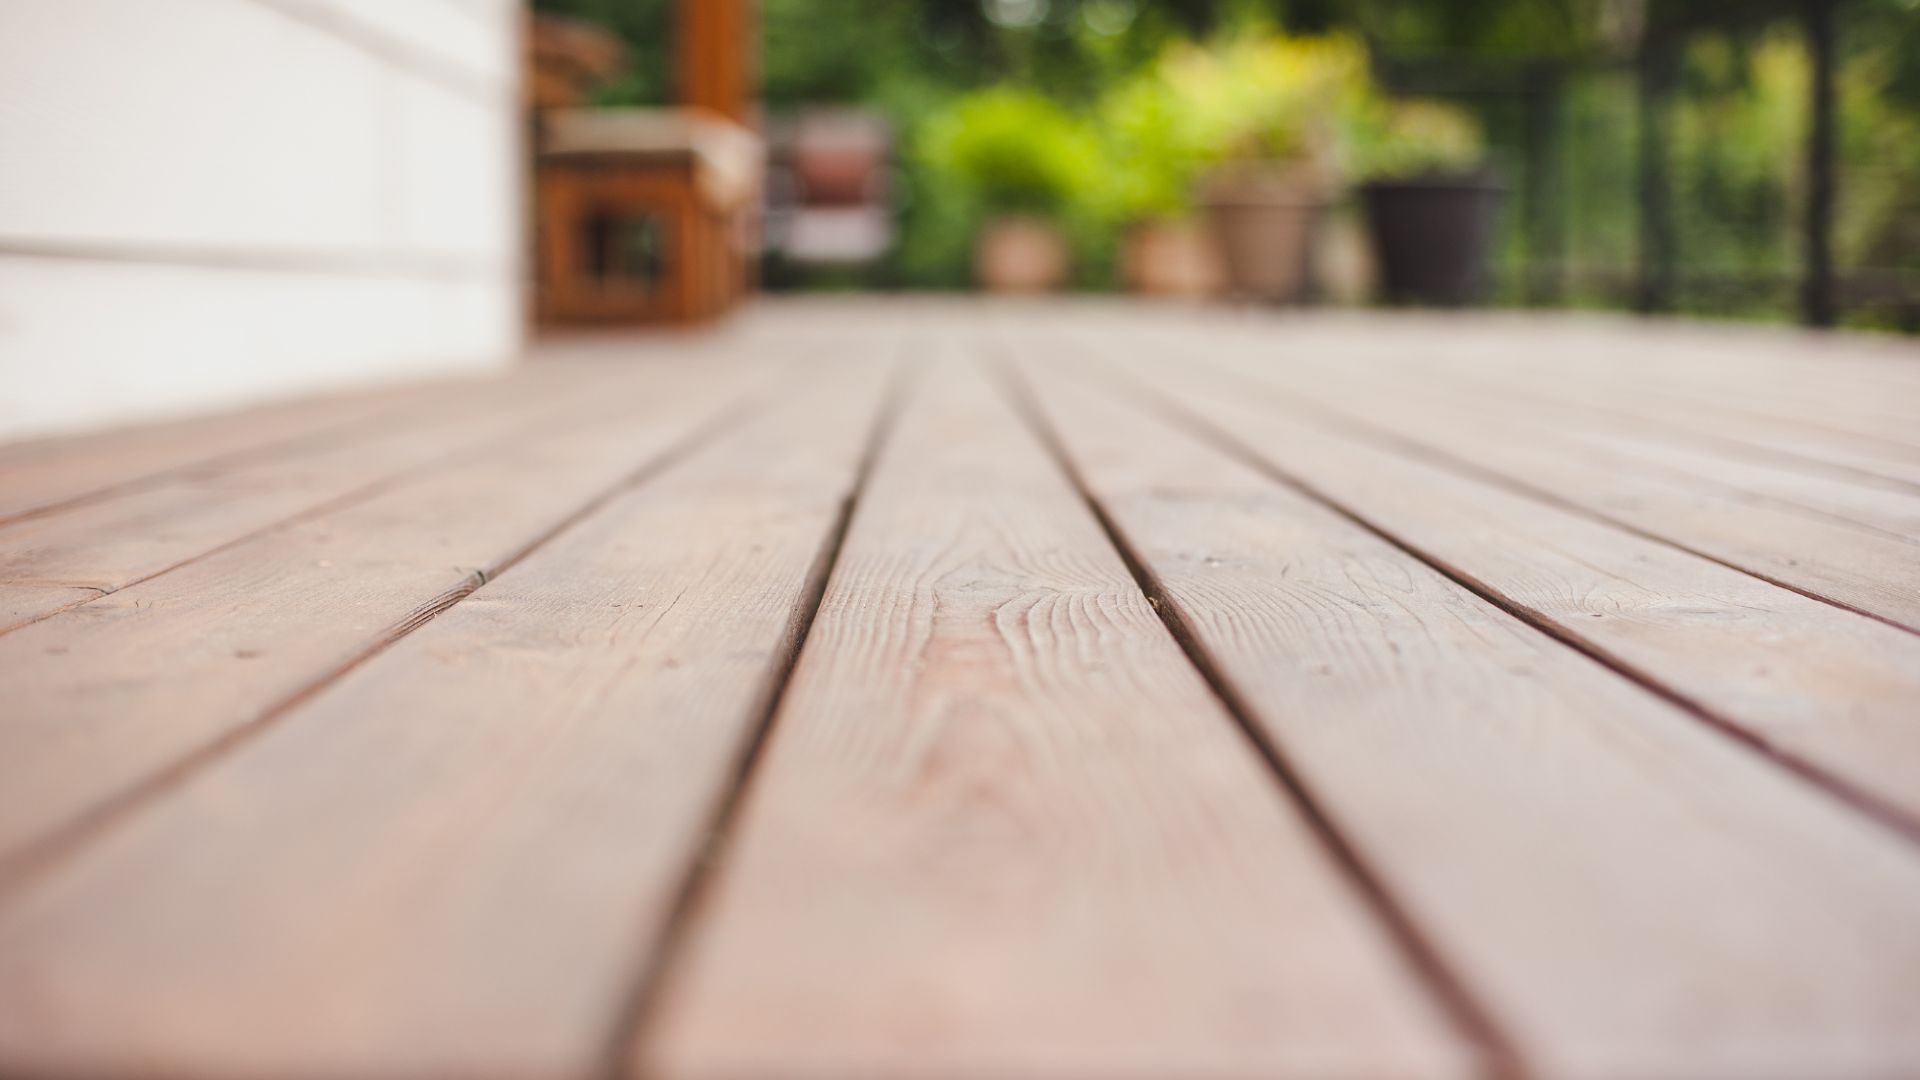 Close-up of a wooden deck with a blurred garden background.